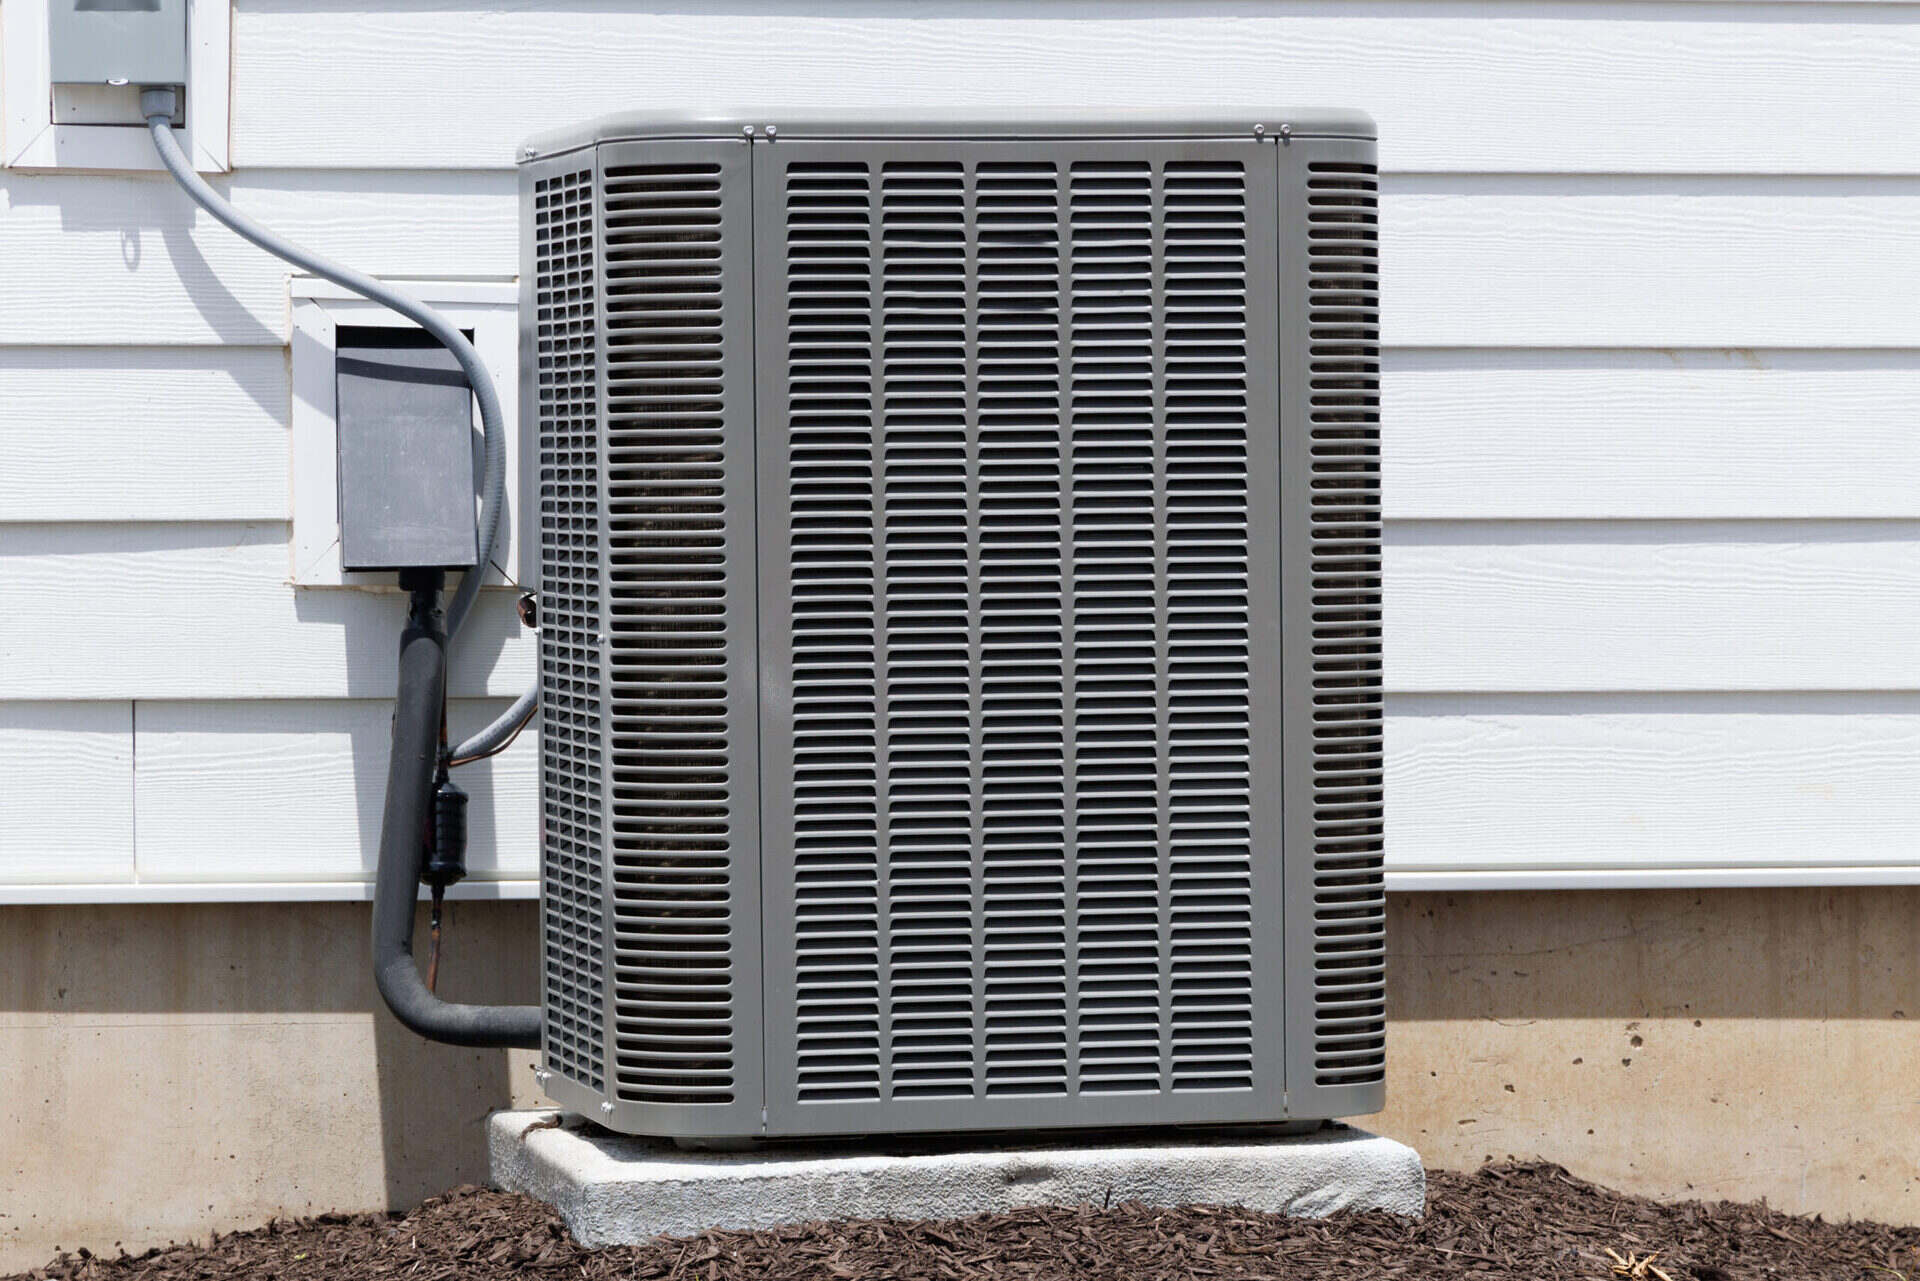 How To Protect An AC Outdoor Unit From Damage | Storables